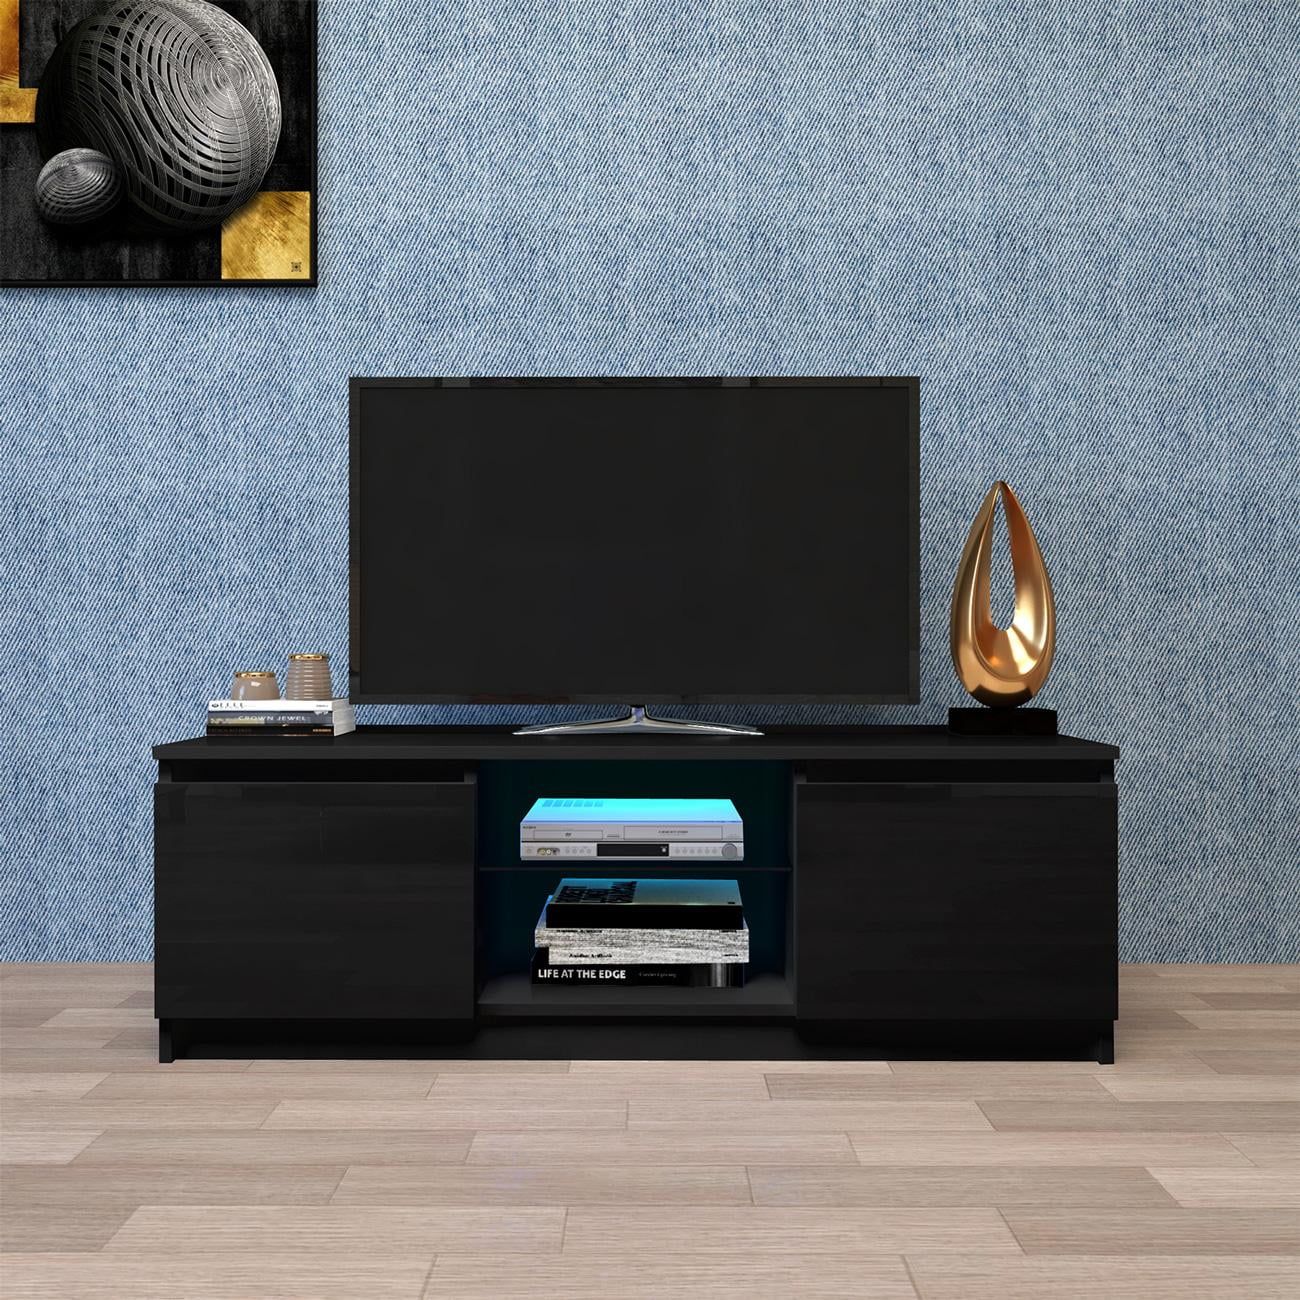 Tv Stand With Storage Drawers Shelves Led Rgb Lights, For Flat Tv 40 55 Regarding Rgb Entertainment Centers Black (View 4 of 20)